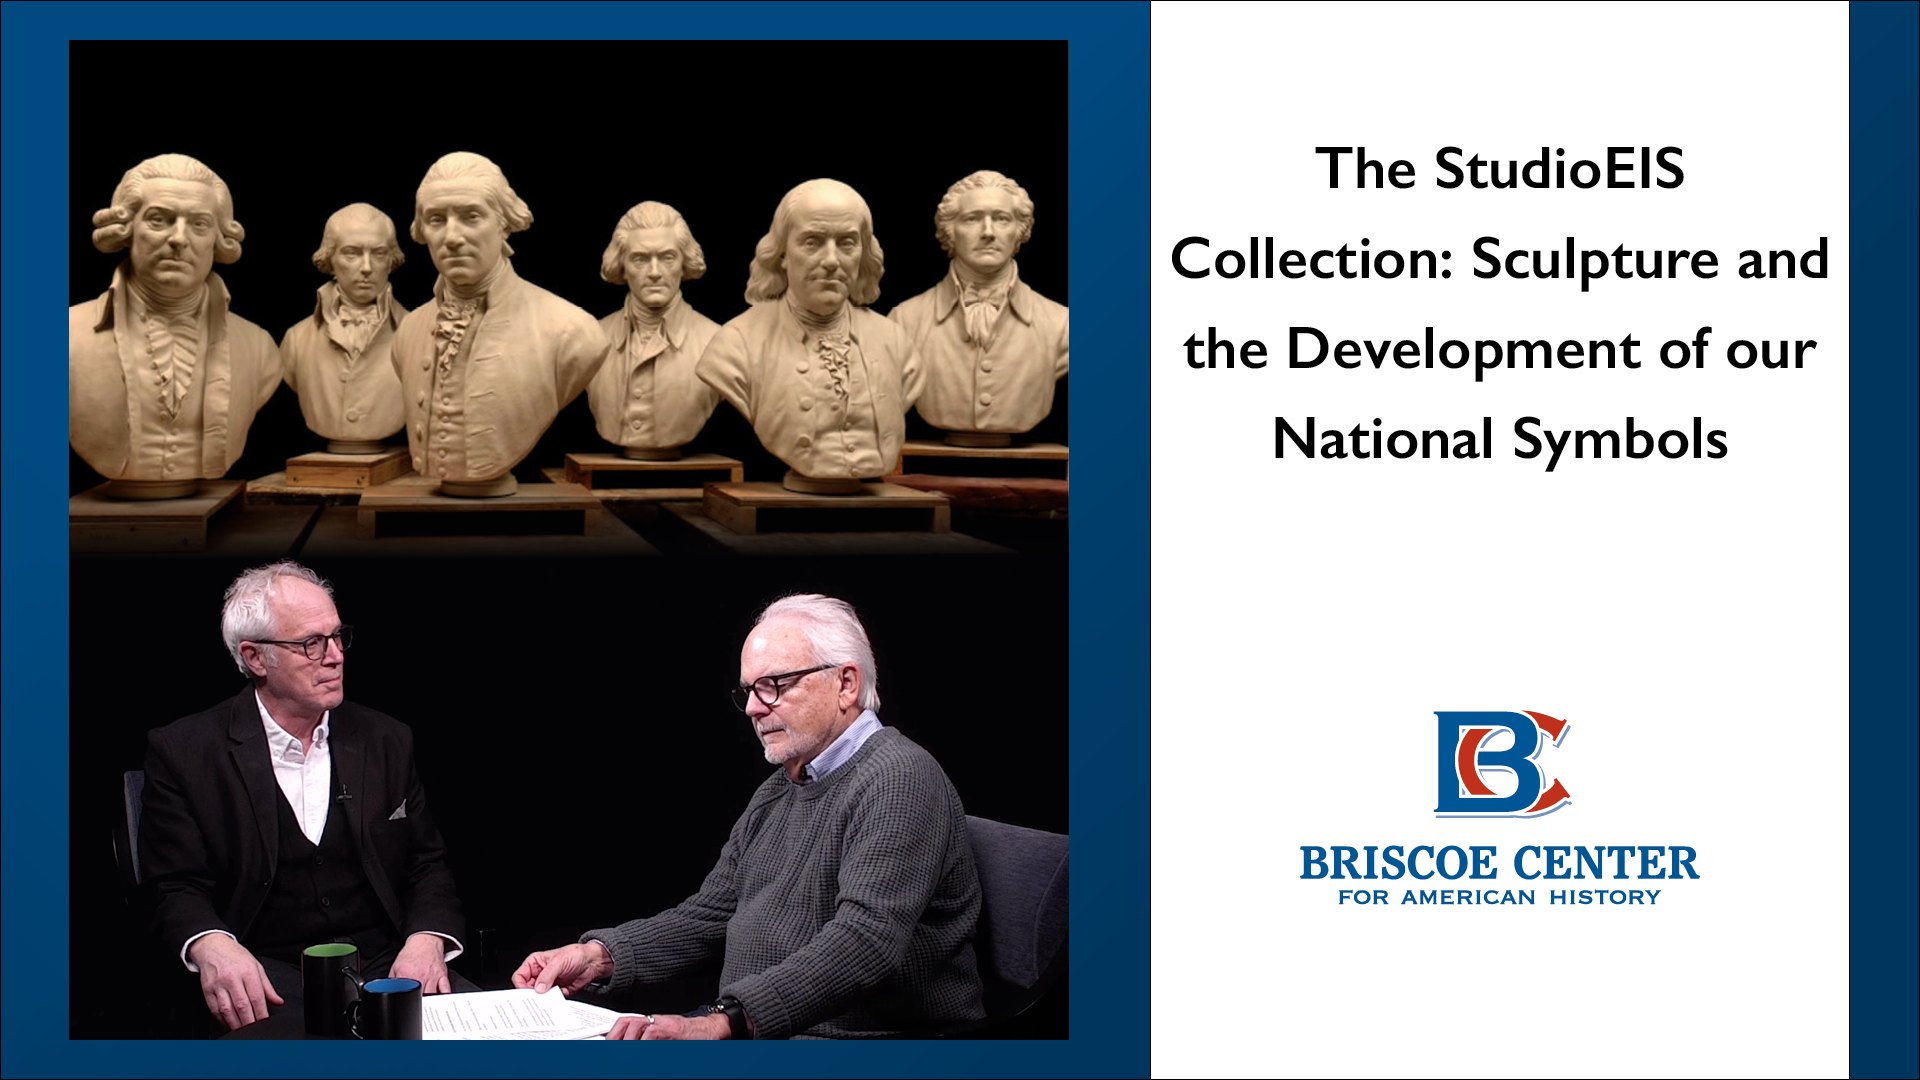 The StudioEIS Collection: Sculpture and the Development of our National Symbols